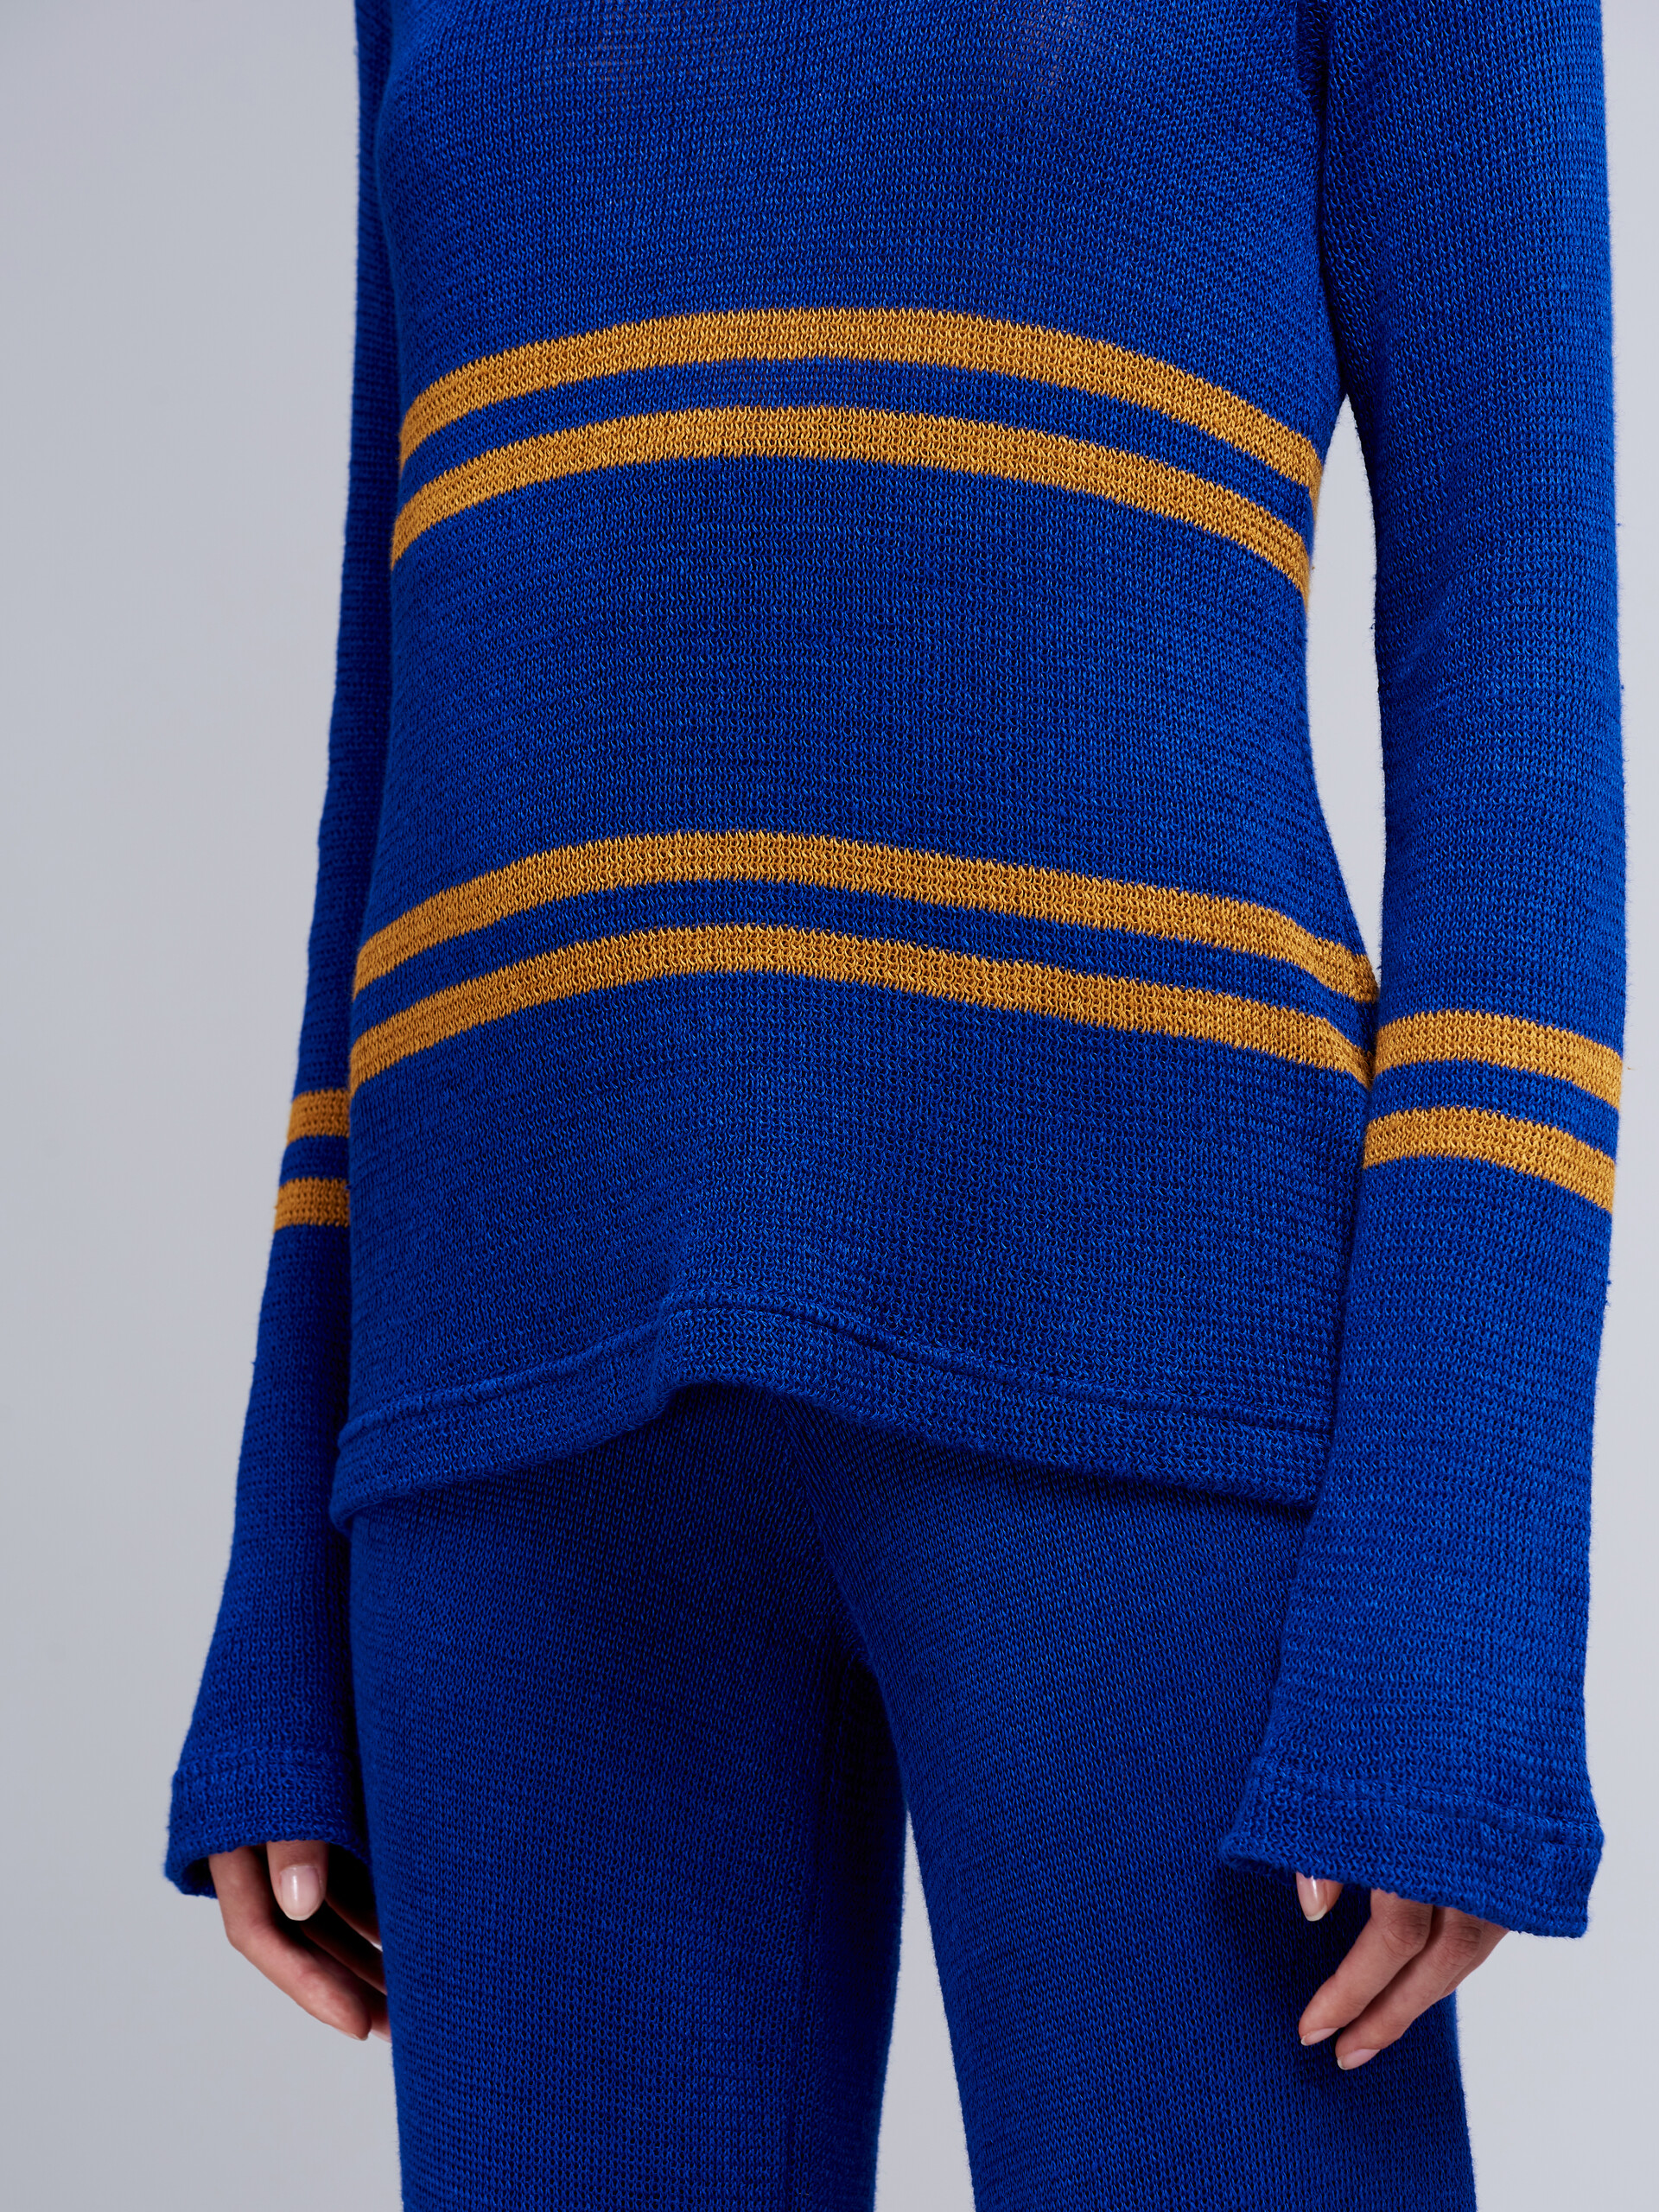 Striped linen sweater - Pullovers - Image 4